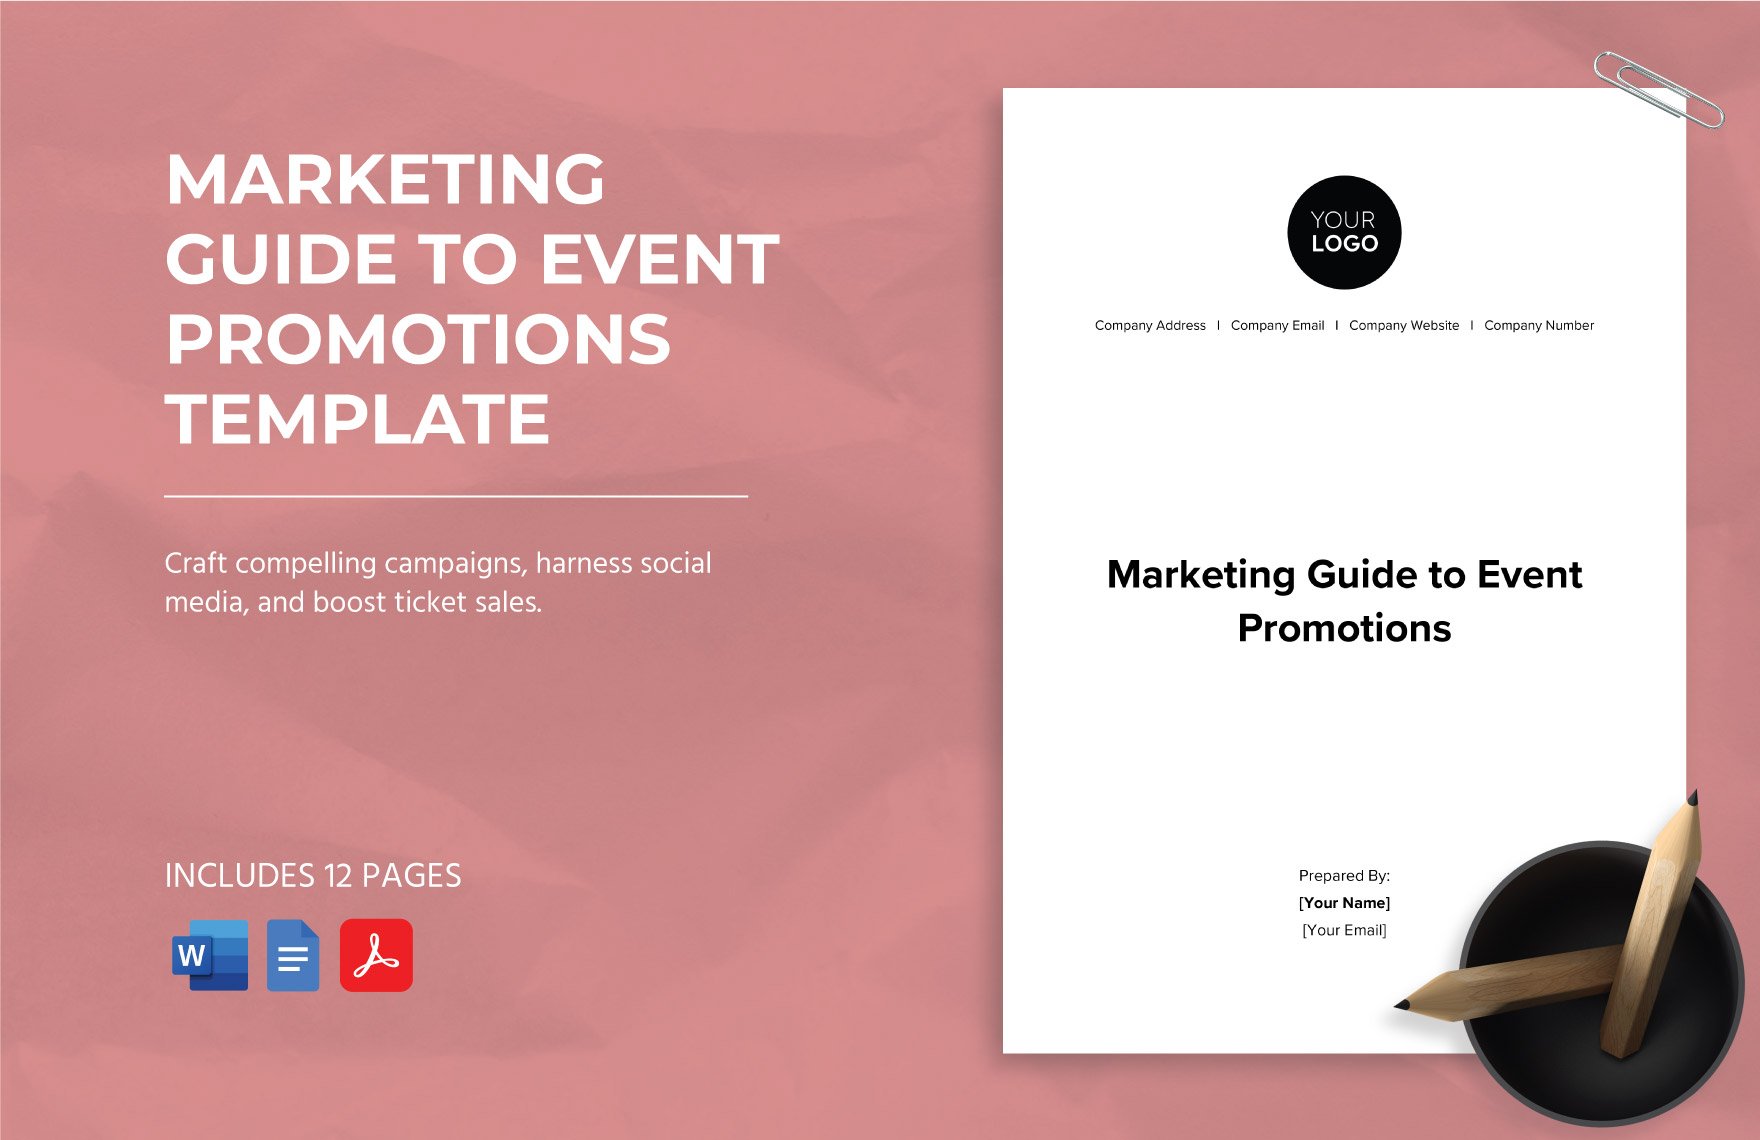 Marketing Guide to Event Promotions Template in Word, Google Docs, PDF